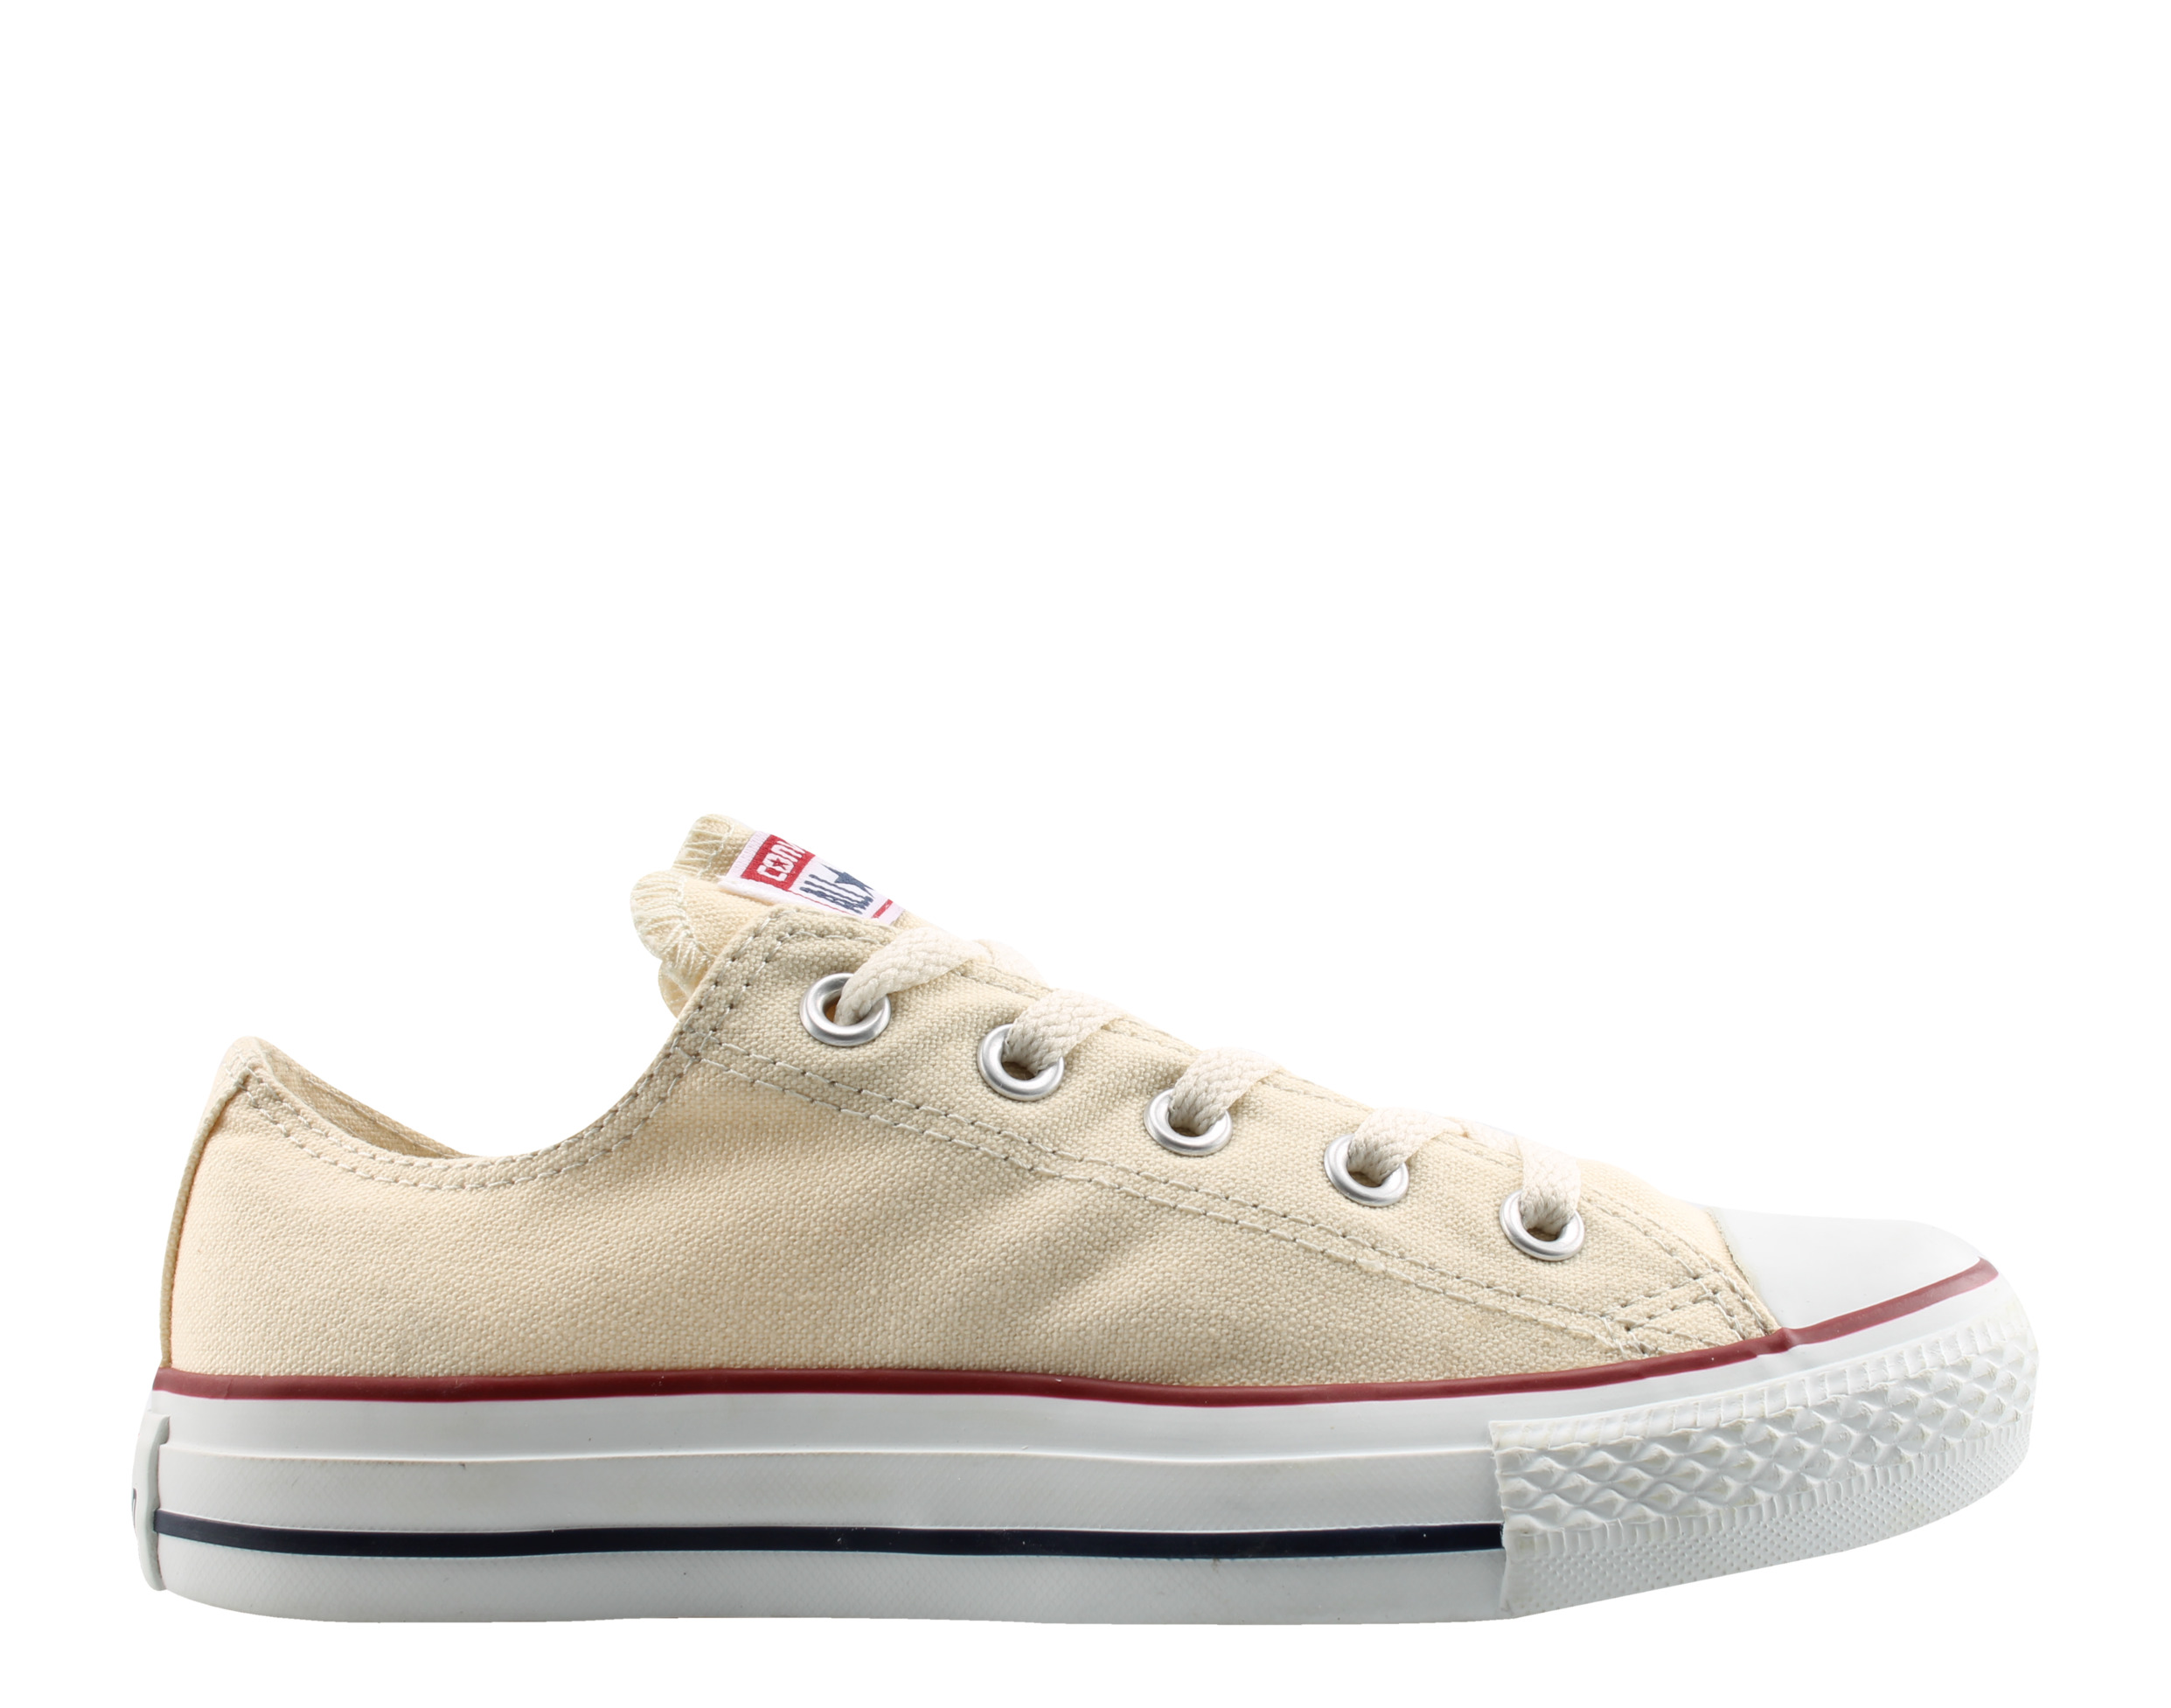 Converse Chuck Taylor OX All Star Big Kids Sneakers Unbleach White m9165 - image 2 of 6